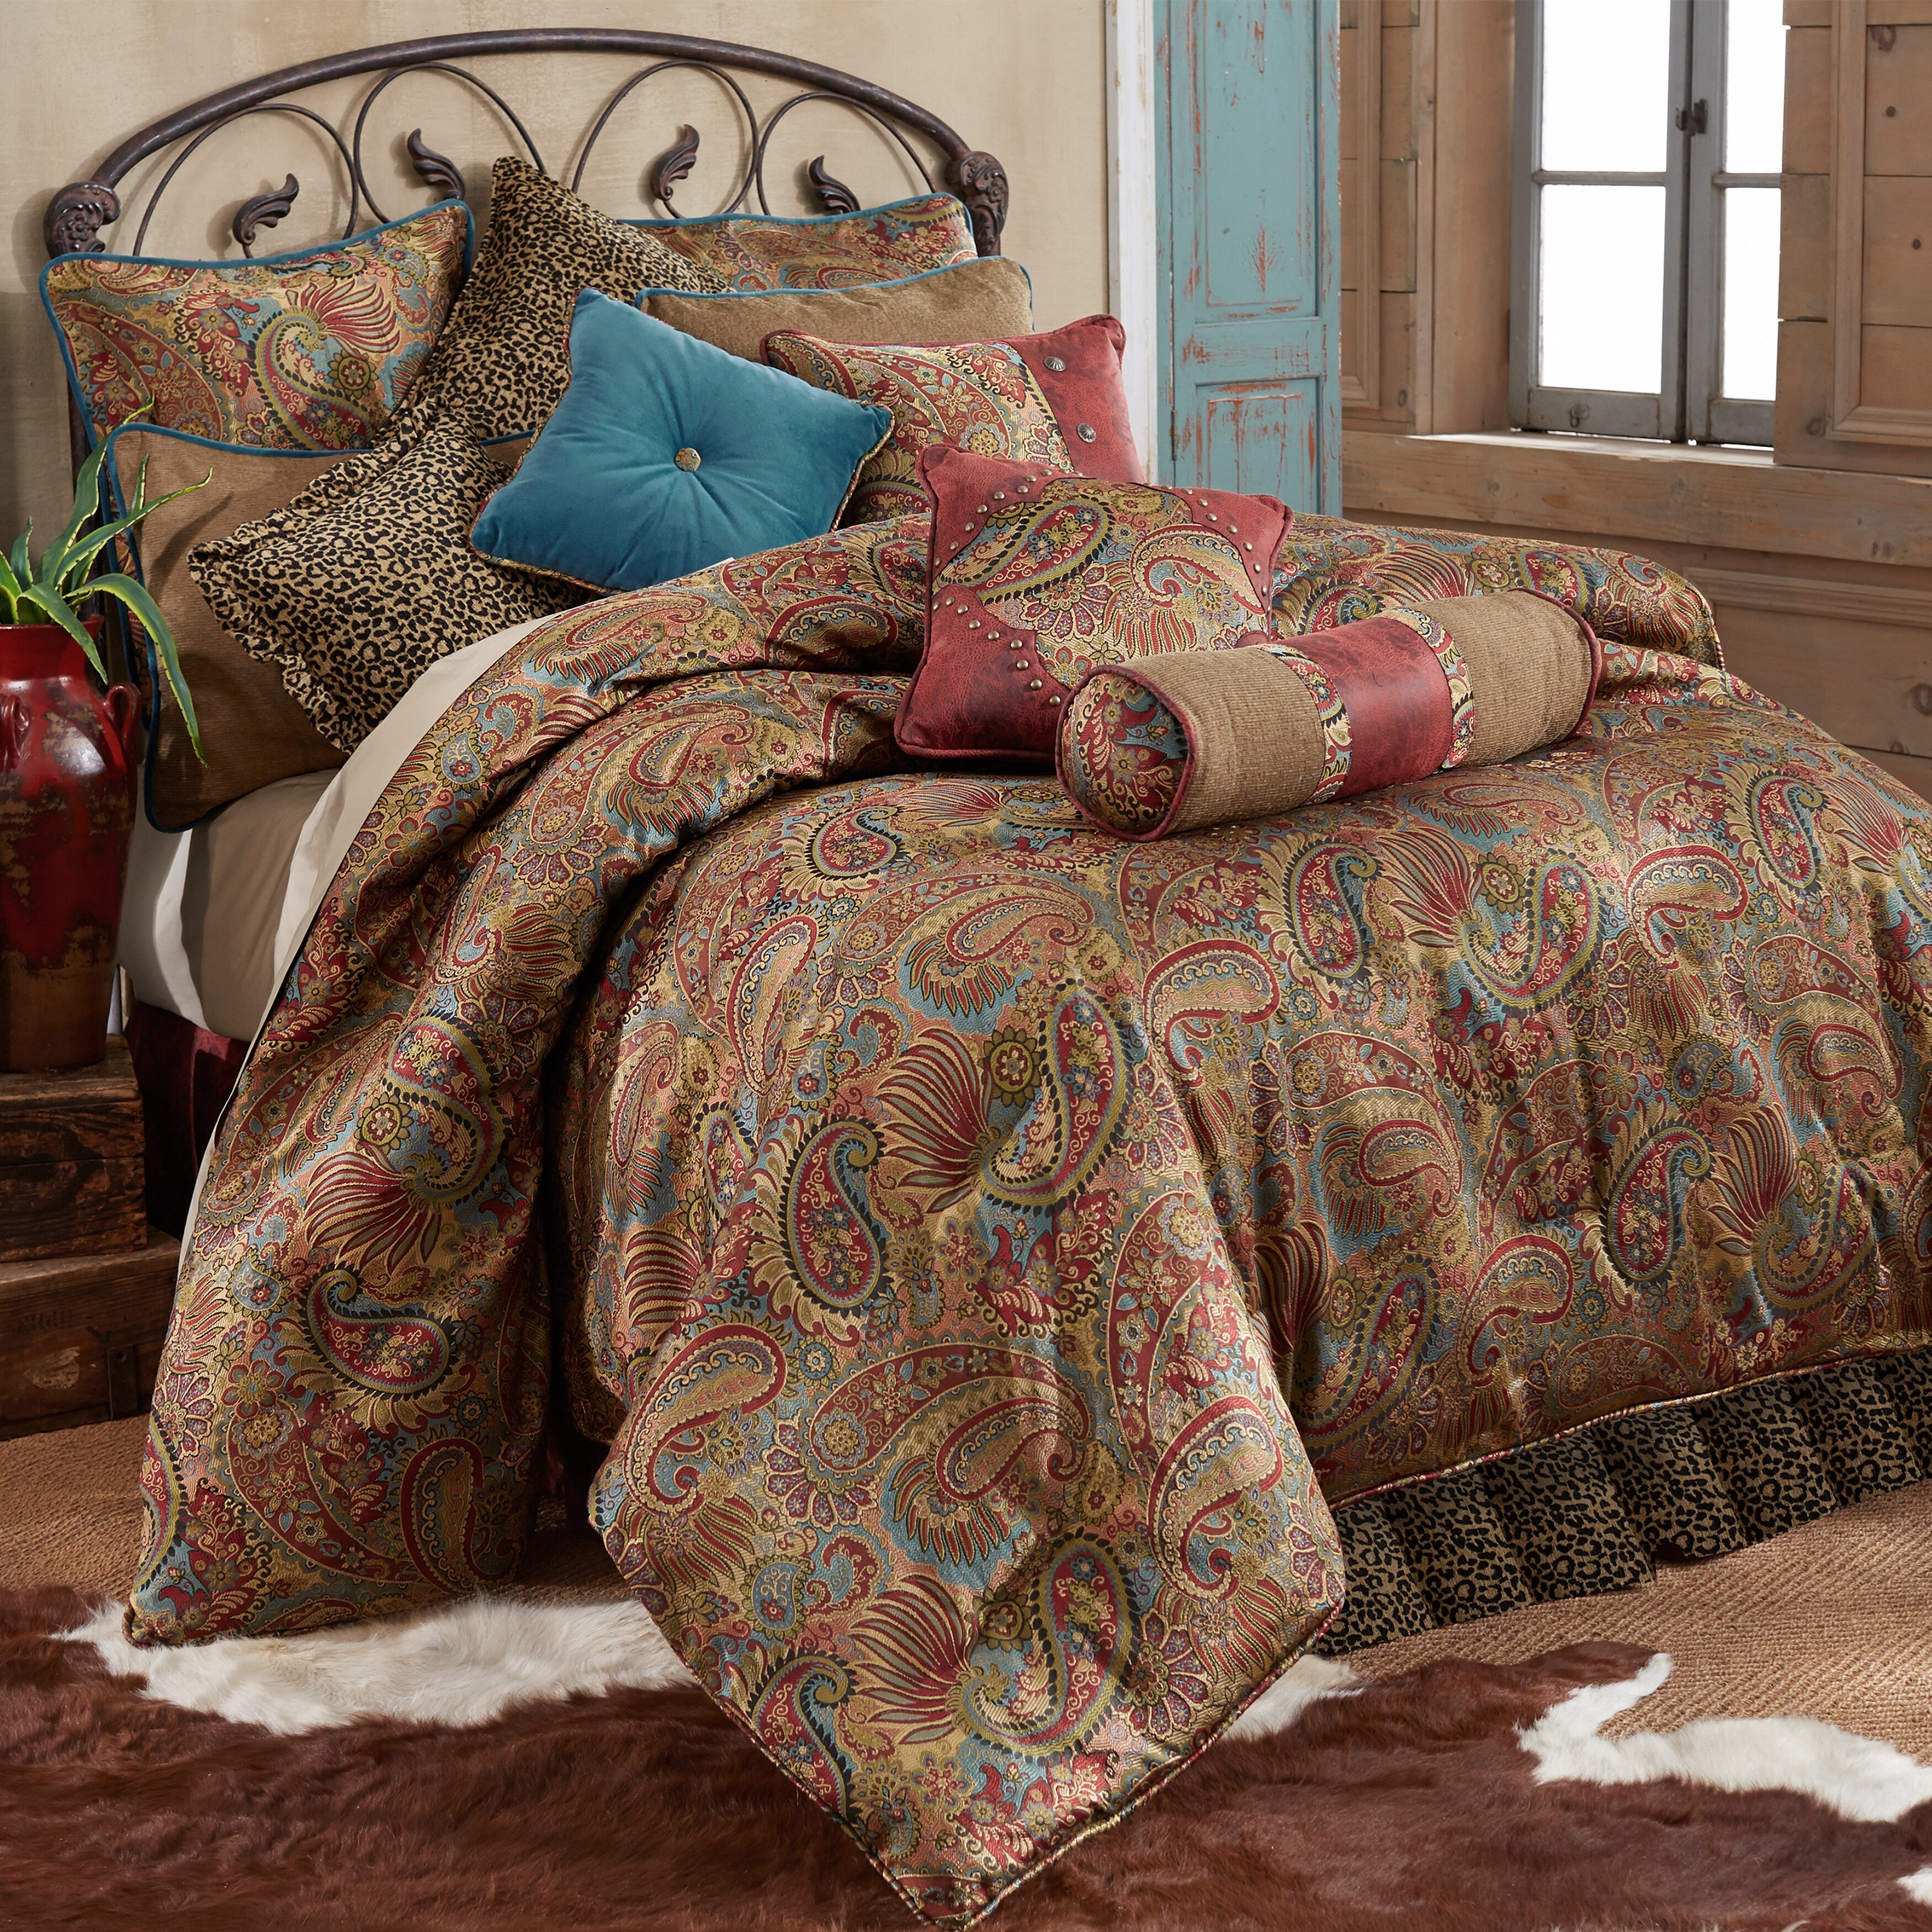 https://ak1.ostkcdn.com/images/products/is/images/direct/d4826794aac3848ad68da7d235a44b9ac949f1ff/HiEnd-Accents-Paisley-Print-Throw-Pillow-with-Red-Faux-Leather-Corners%2C-18x18.jpg